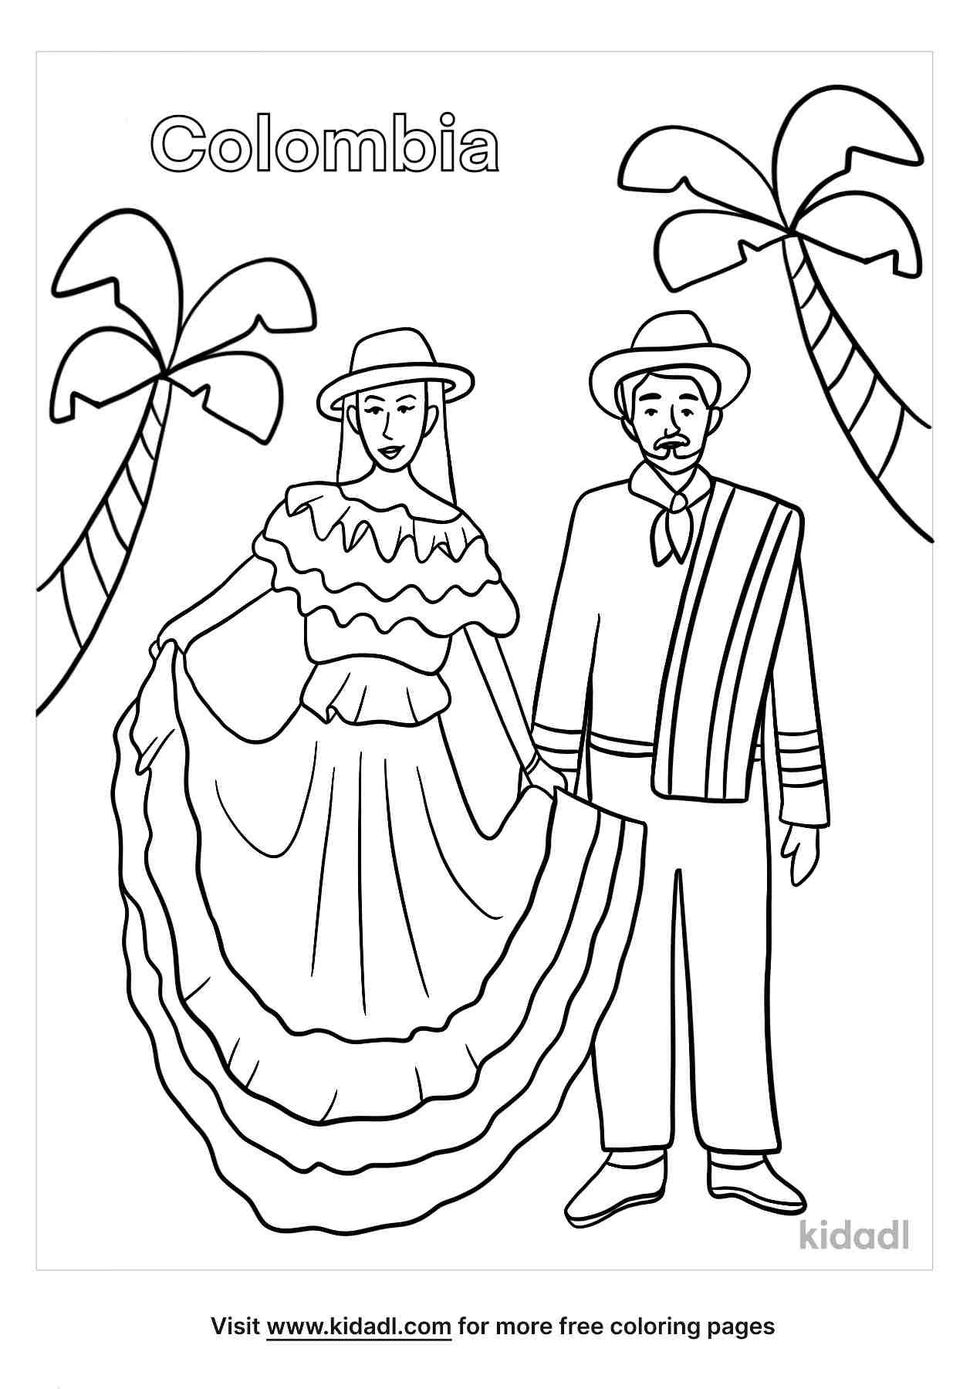 coloring page that have colombia